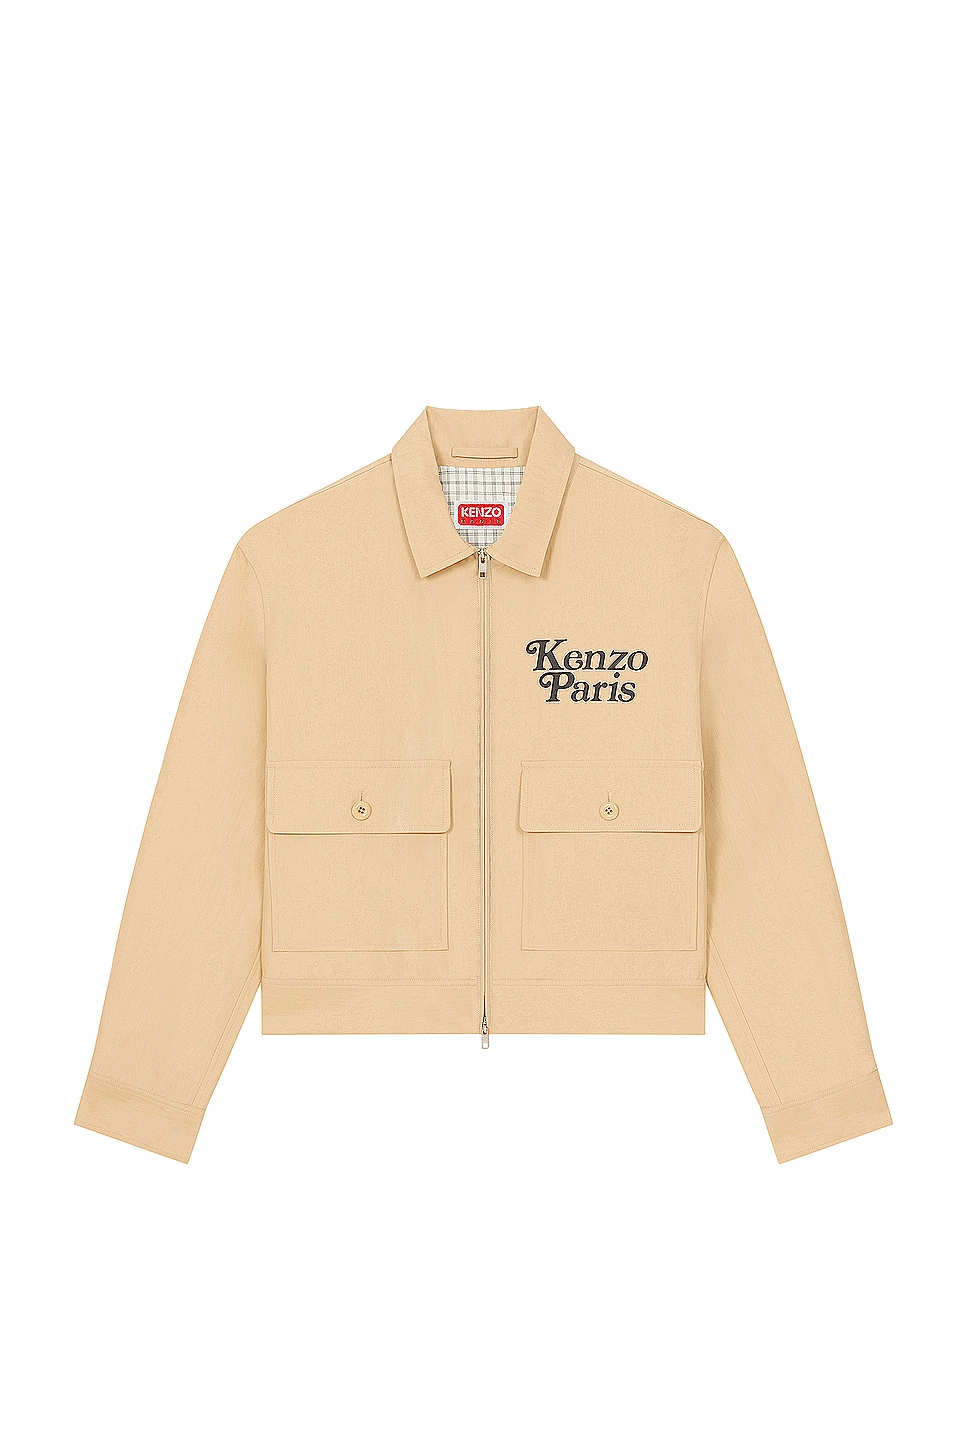 Image 1 of Kenzo By Verdy Short Blouson in Camel